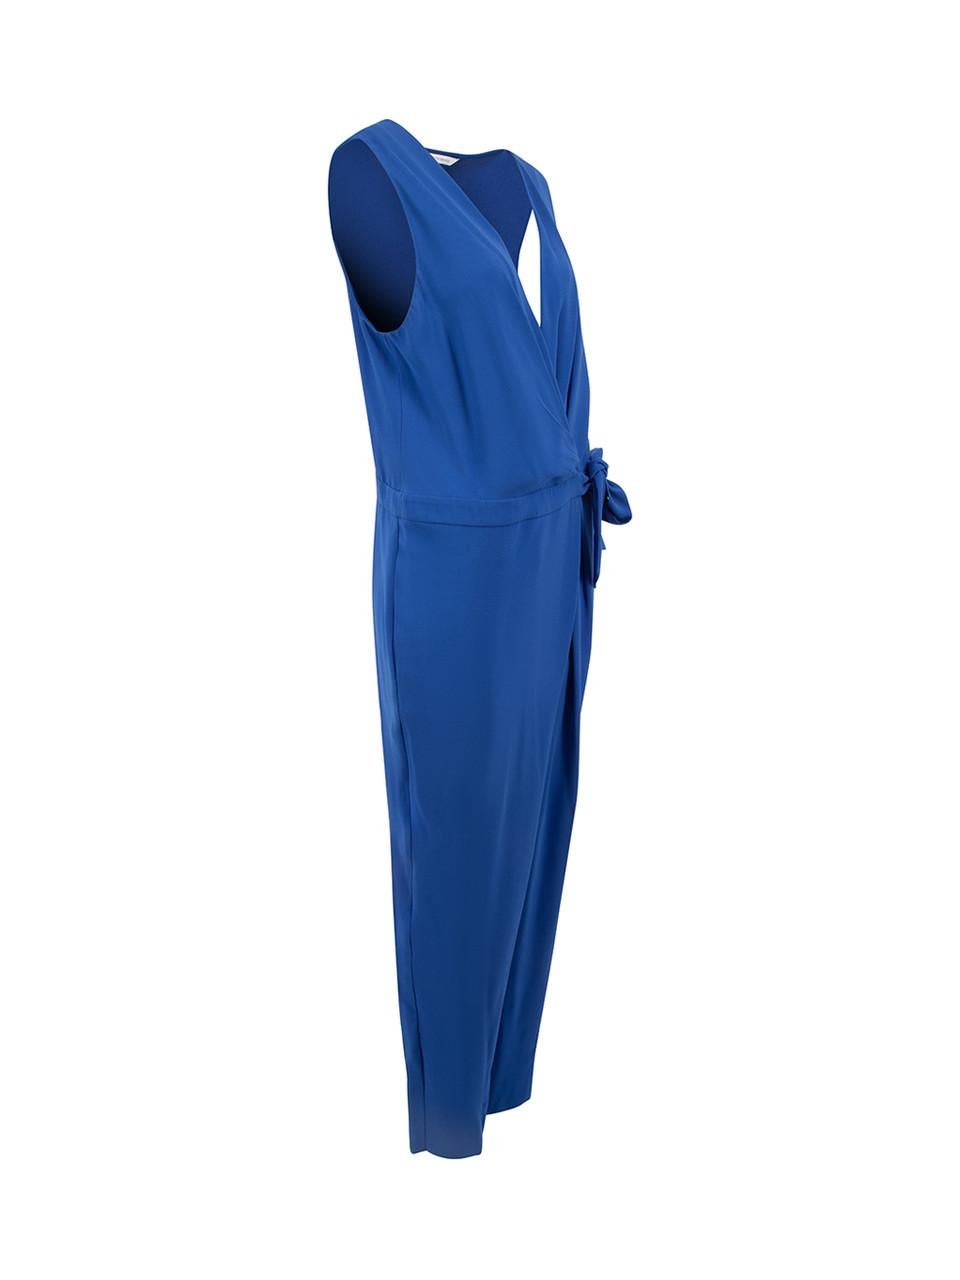 CONDITION is Very good. Hardly any visible wear to jumpsuit is evident on this used Diane Von Furstenberg designer resale item.



Details


Blue

Synthetic material

Sleeveless jumpsuit

Pleated detail

Tie waistband

Tapered leg

2x Side